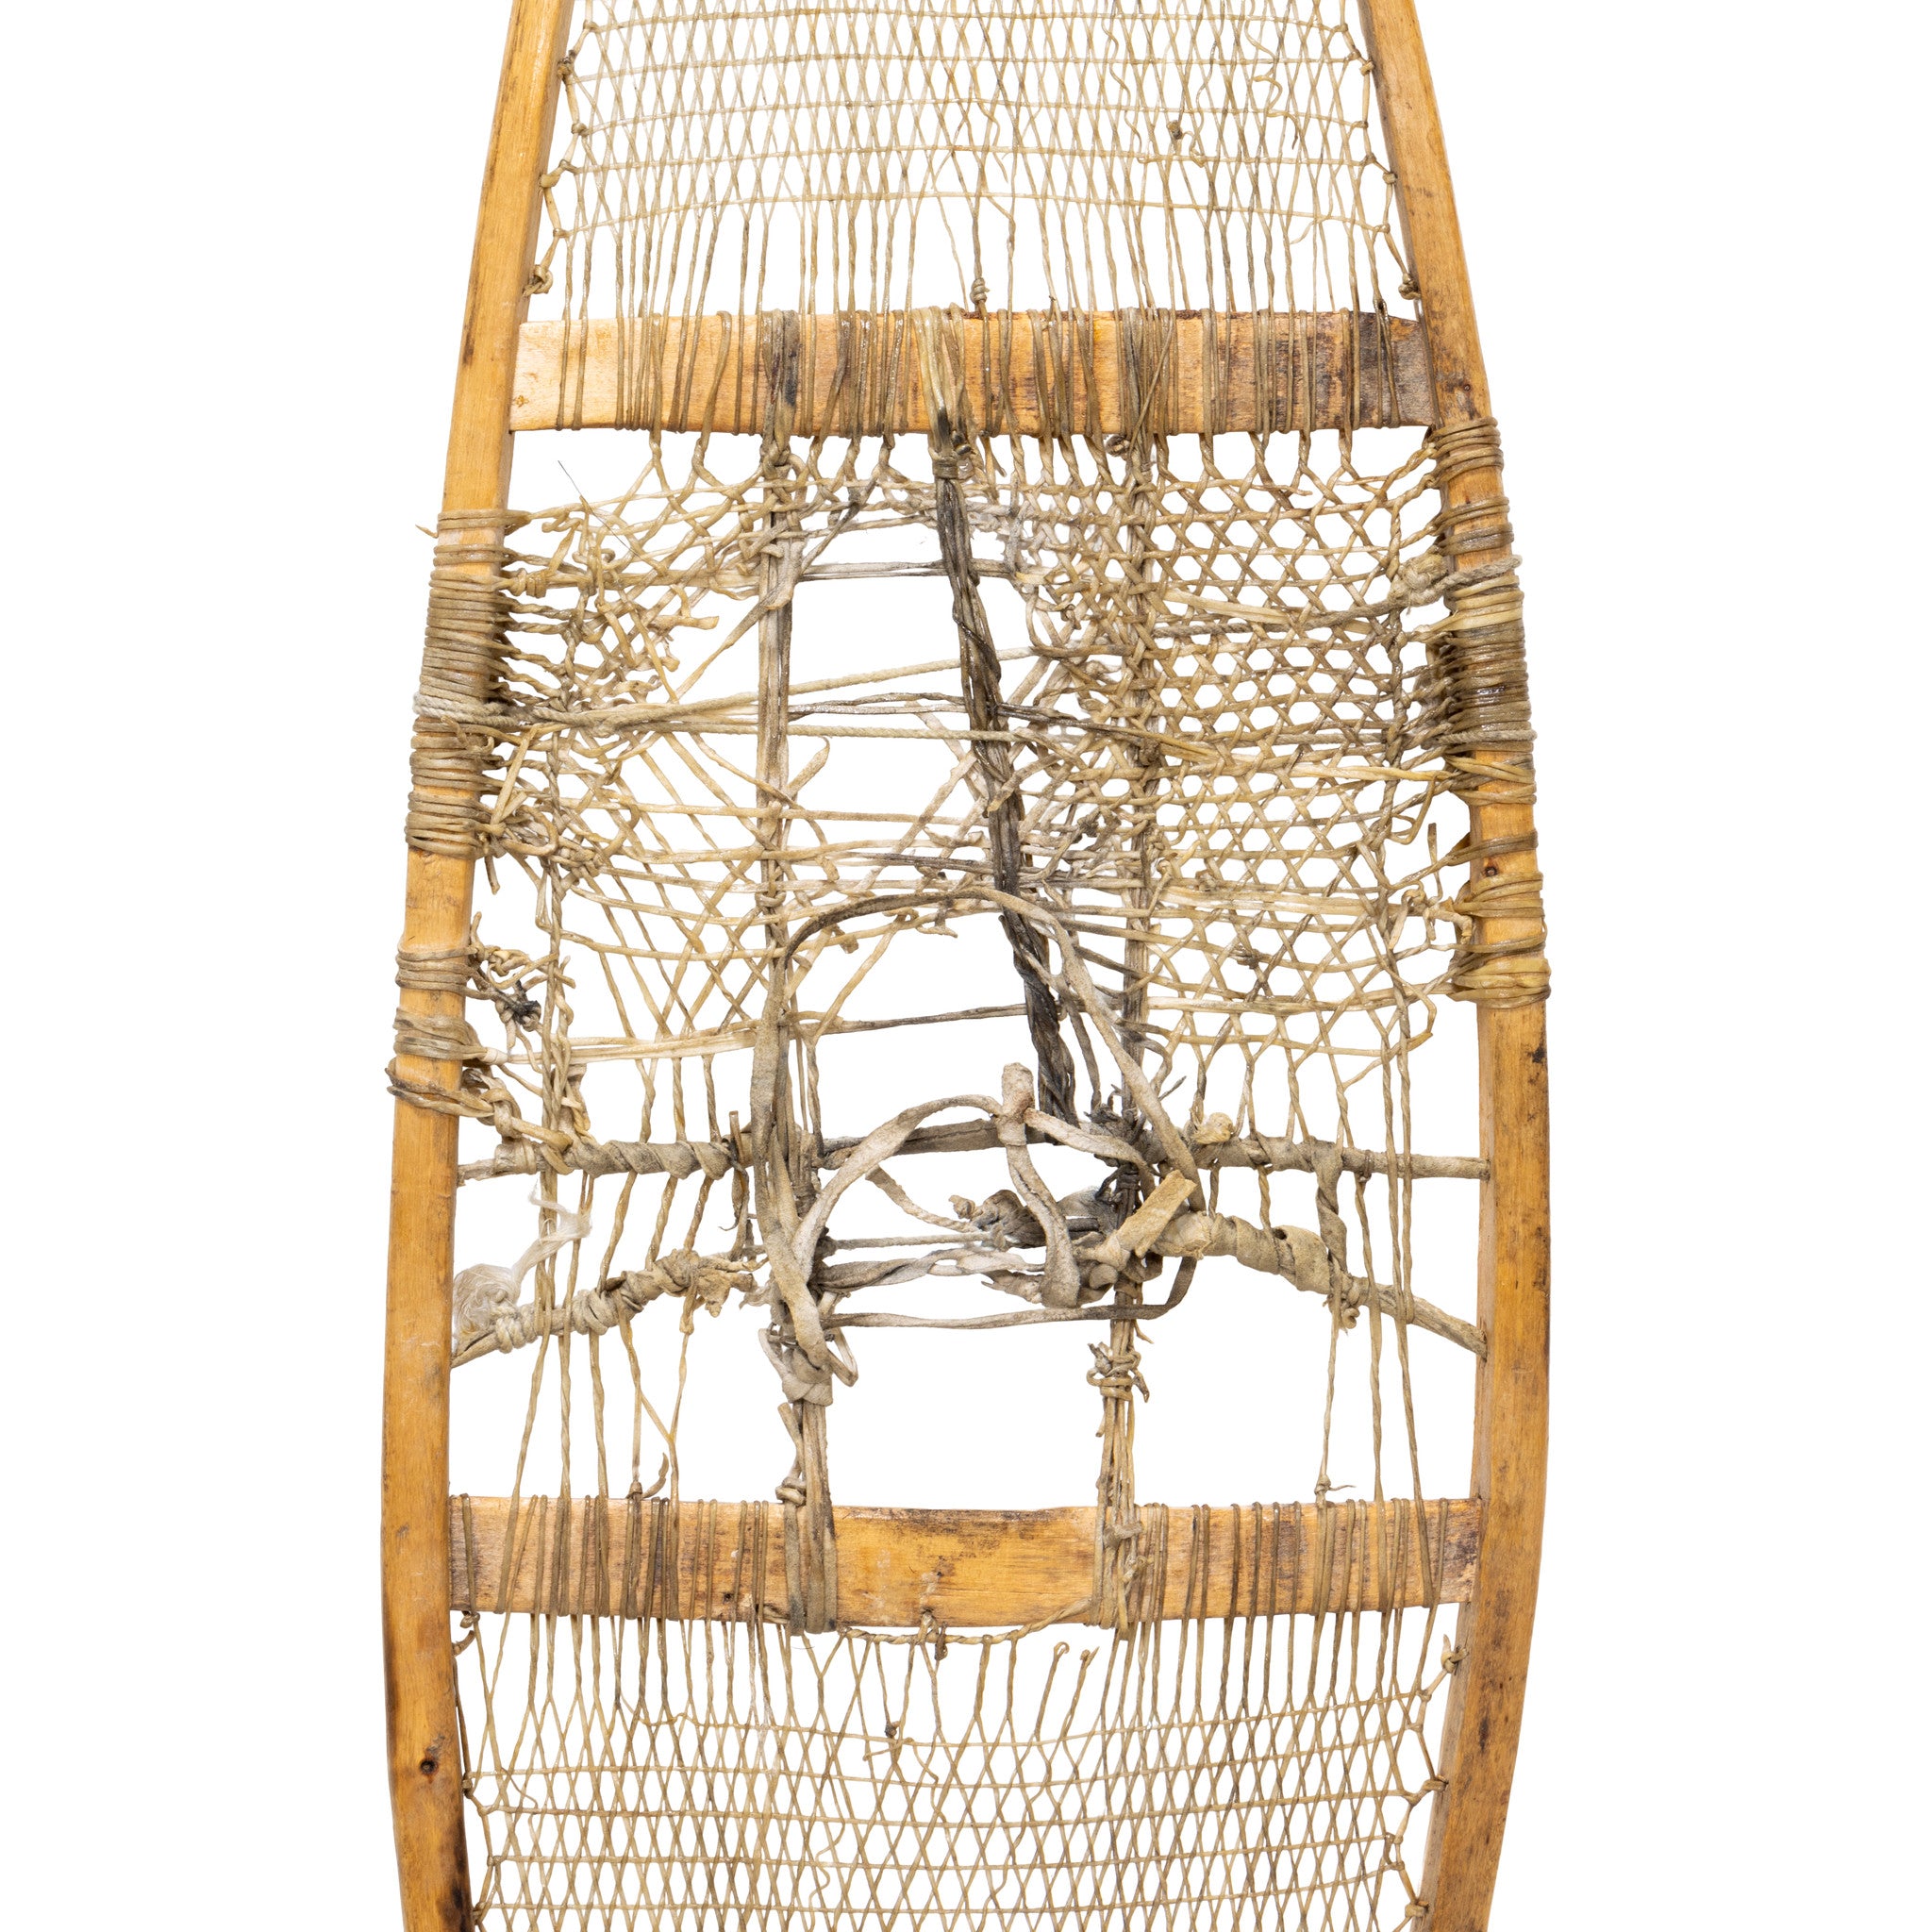 Large Cree Snowshoes